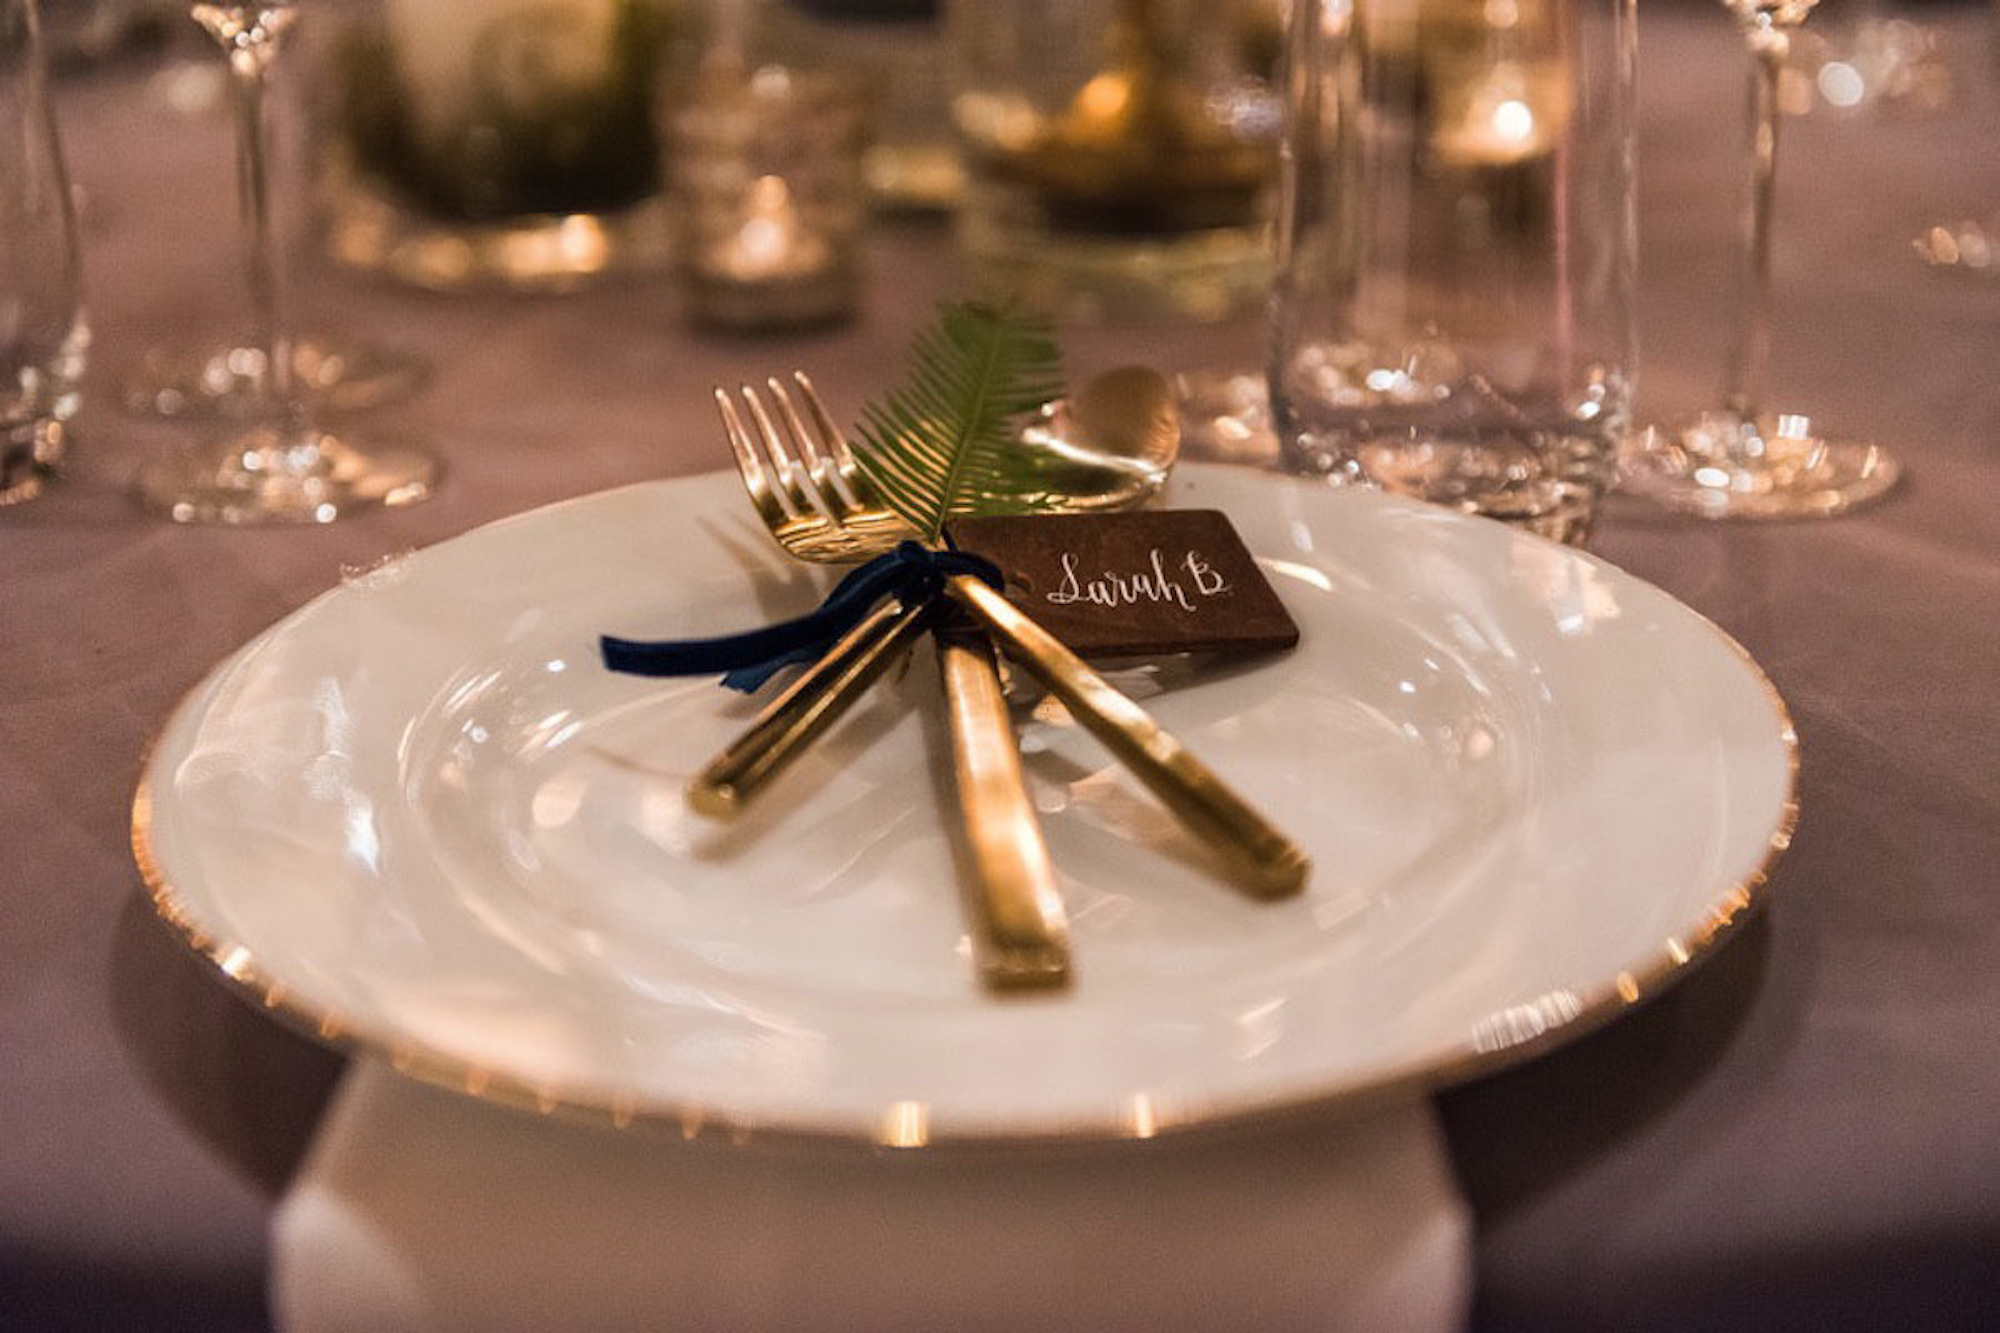 Plate with knife, fork and placecard